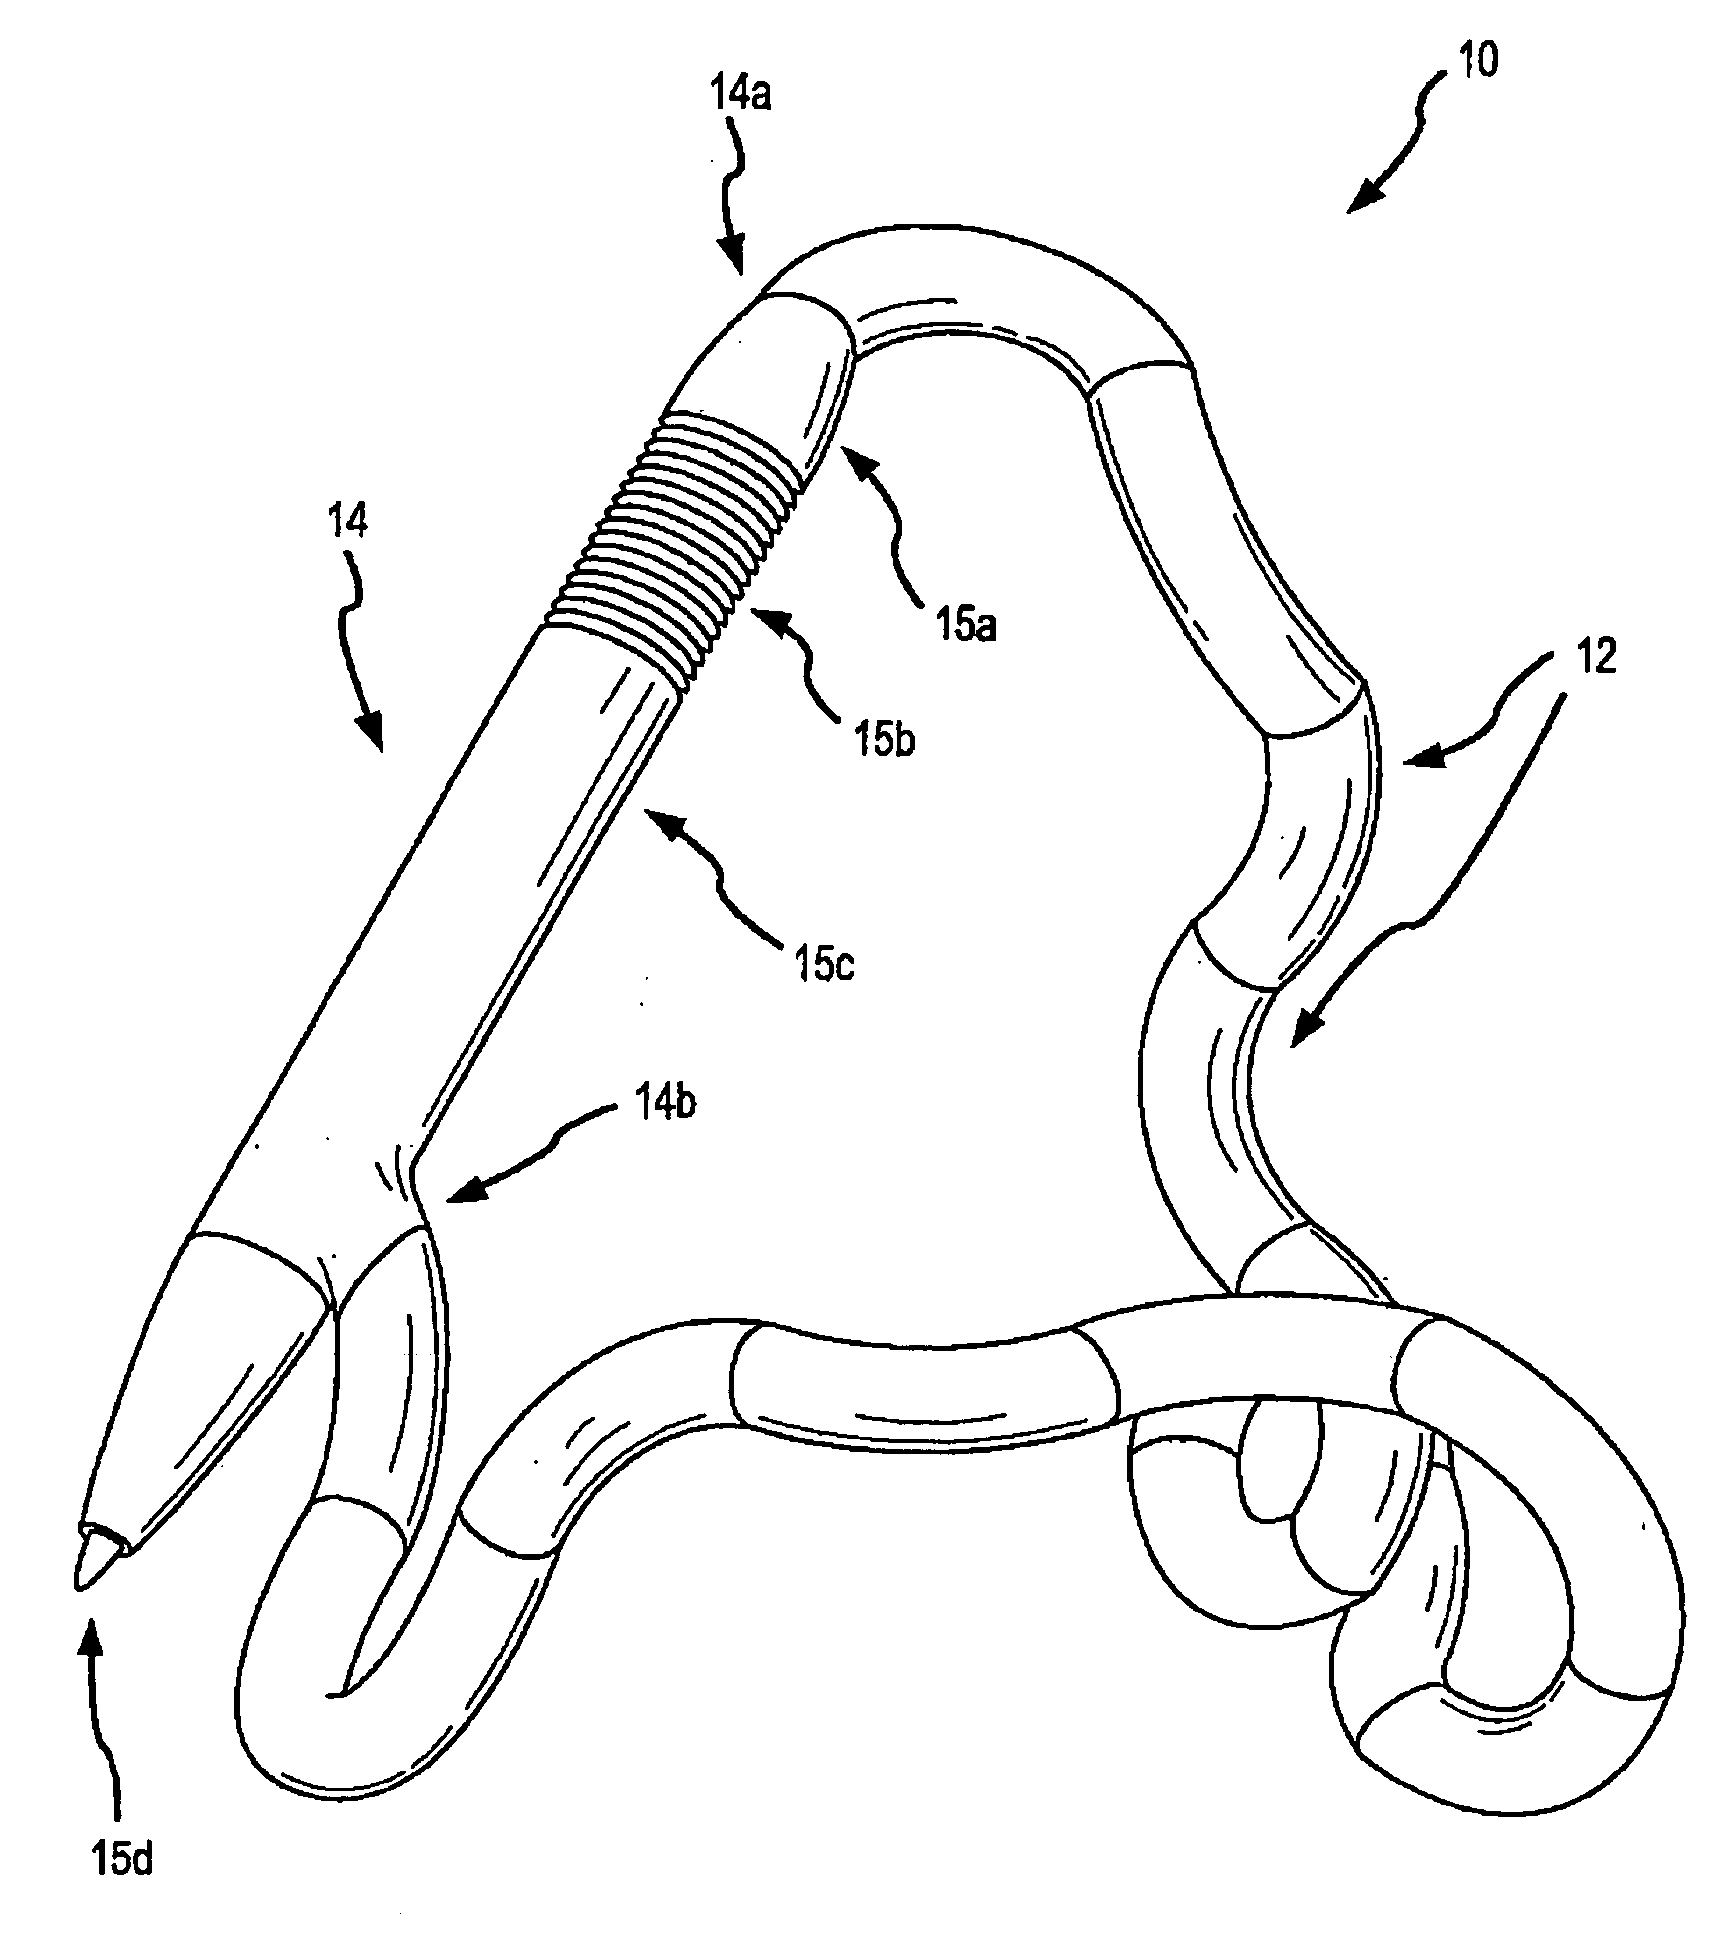 Therapeutic writing instrument devices and methods